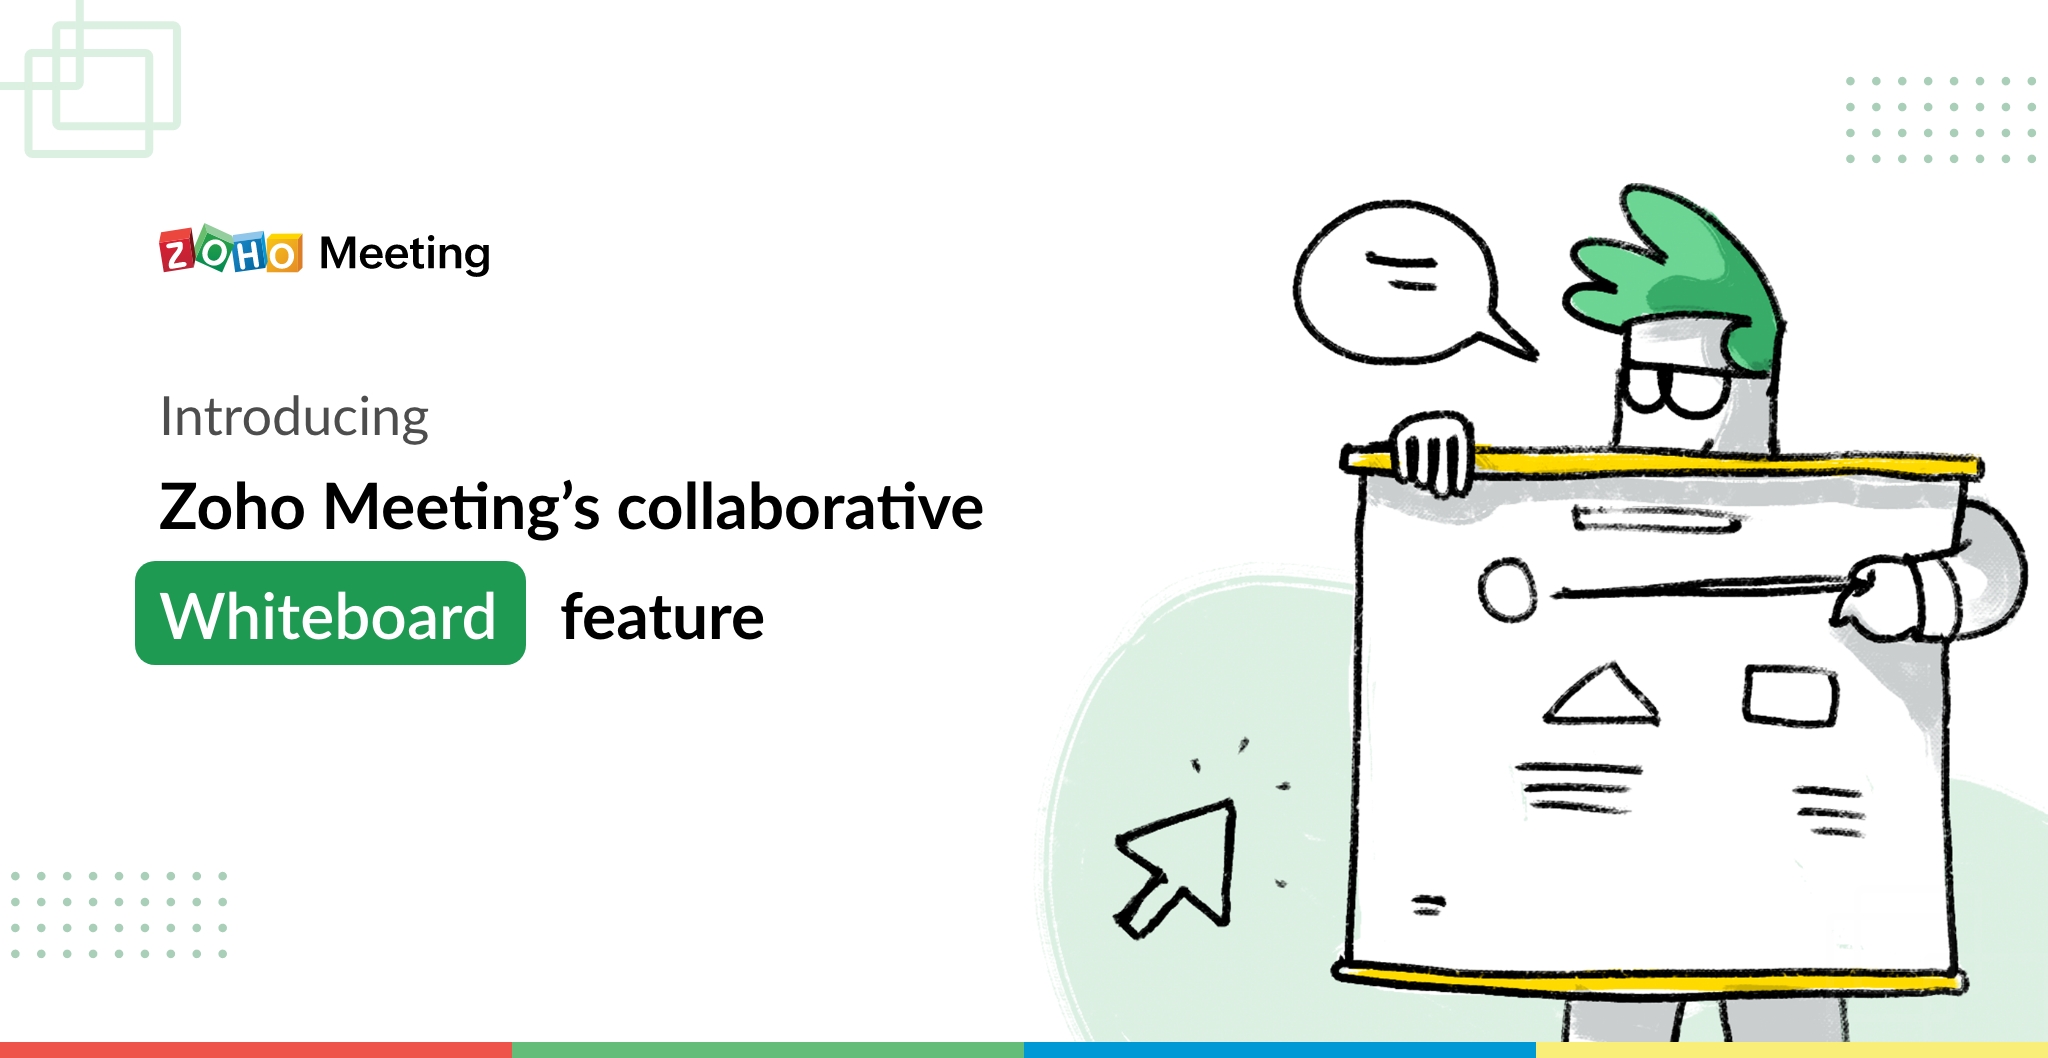 Introducing Zoho Meeting’s collaborative Whiteboard feature!